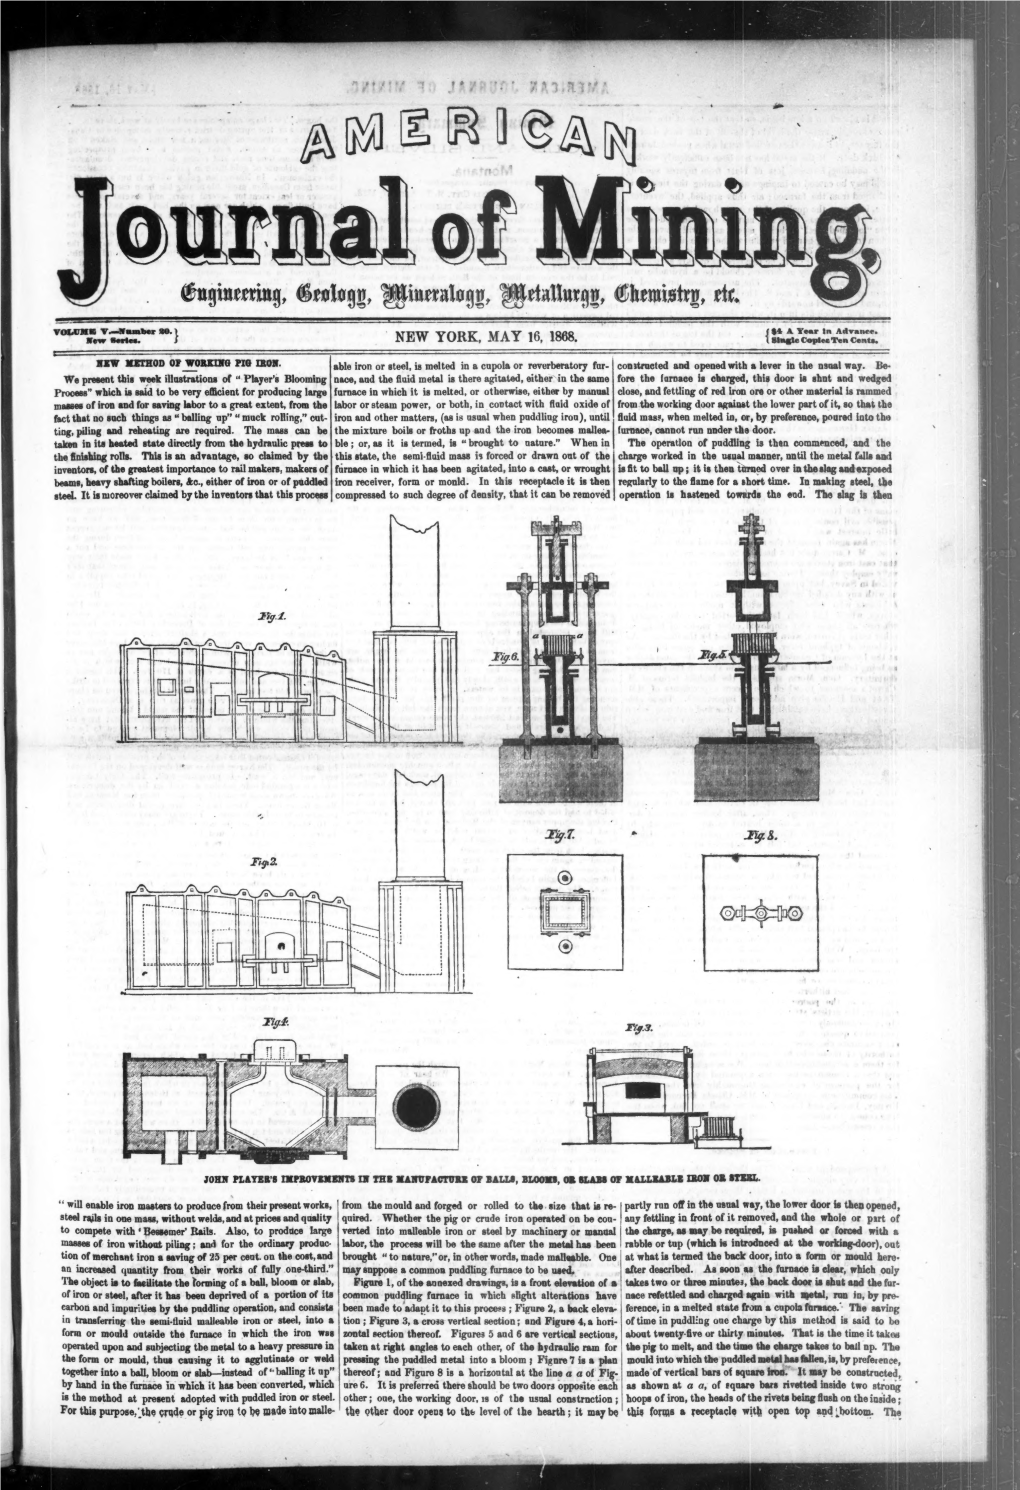 American Journal of Mining 1868-05-16: Vol 5 Iss 20